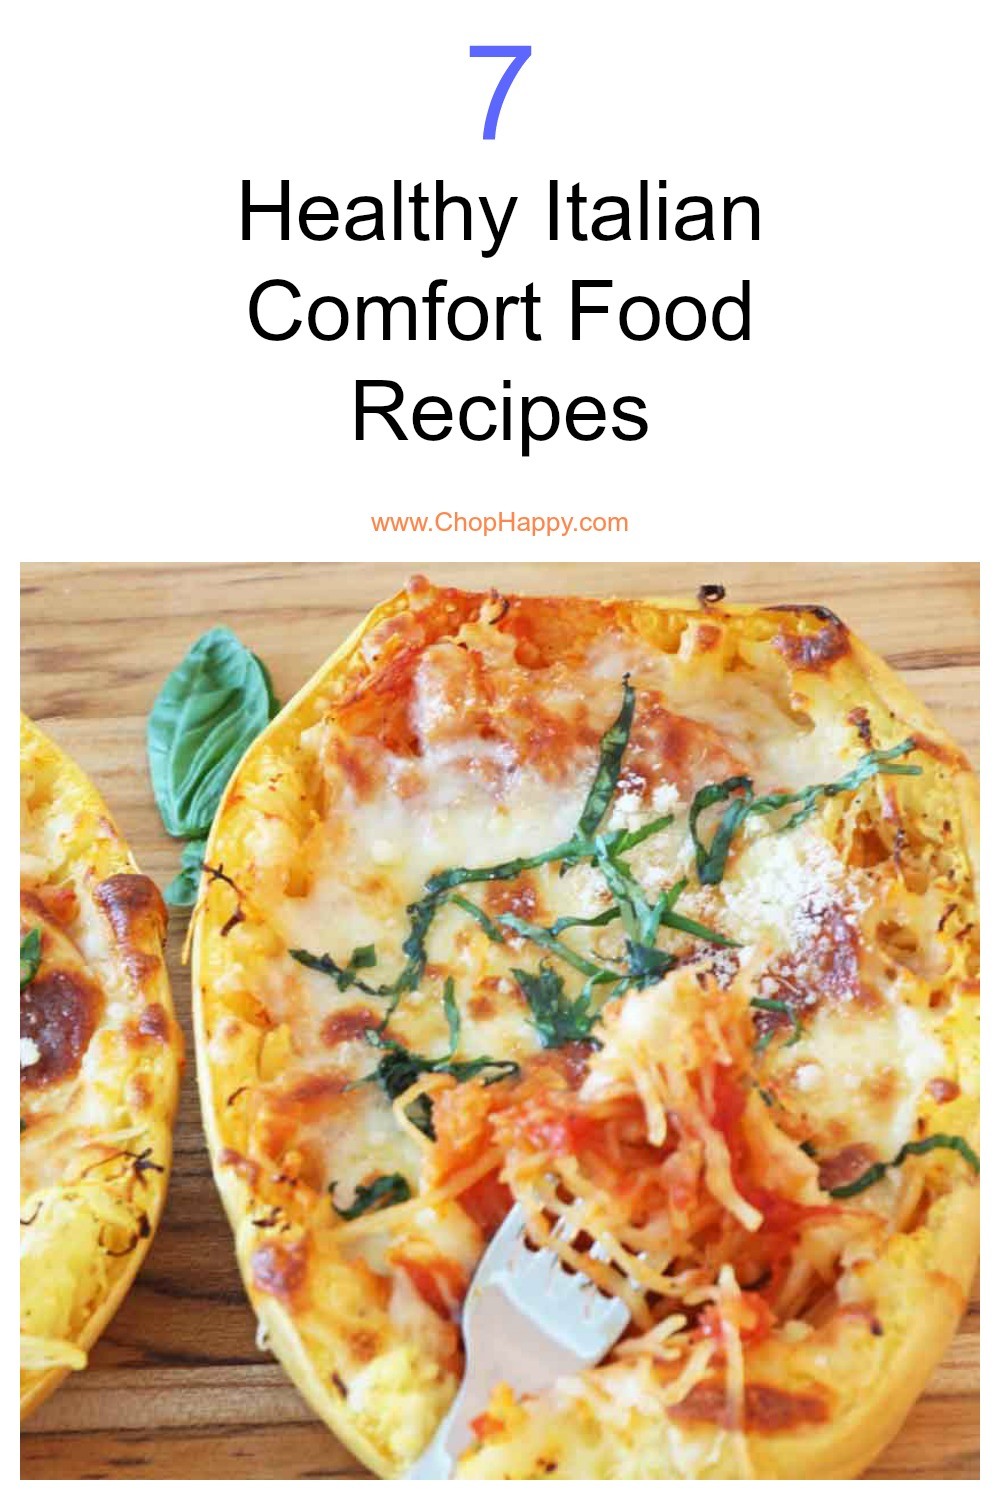 7 Healthy Italian Comfort Food Recipes. Easy weeknight dinners that are cheesy, decadent healthy recipes! Happy Cooking! www.ChopHappy.com #healthyrecipes #easy healthydinners